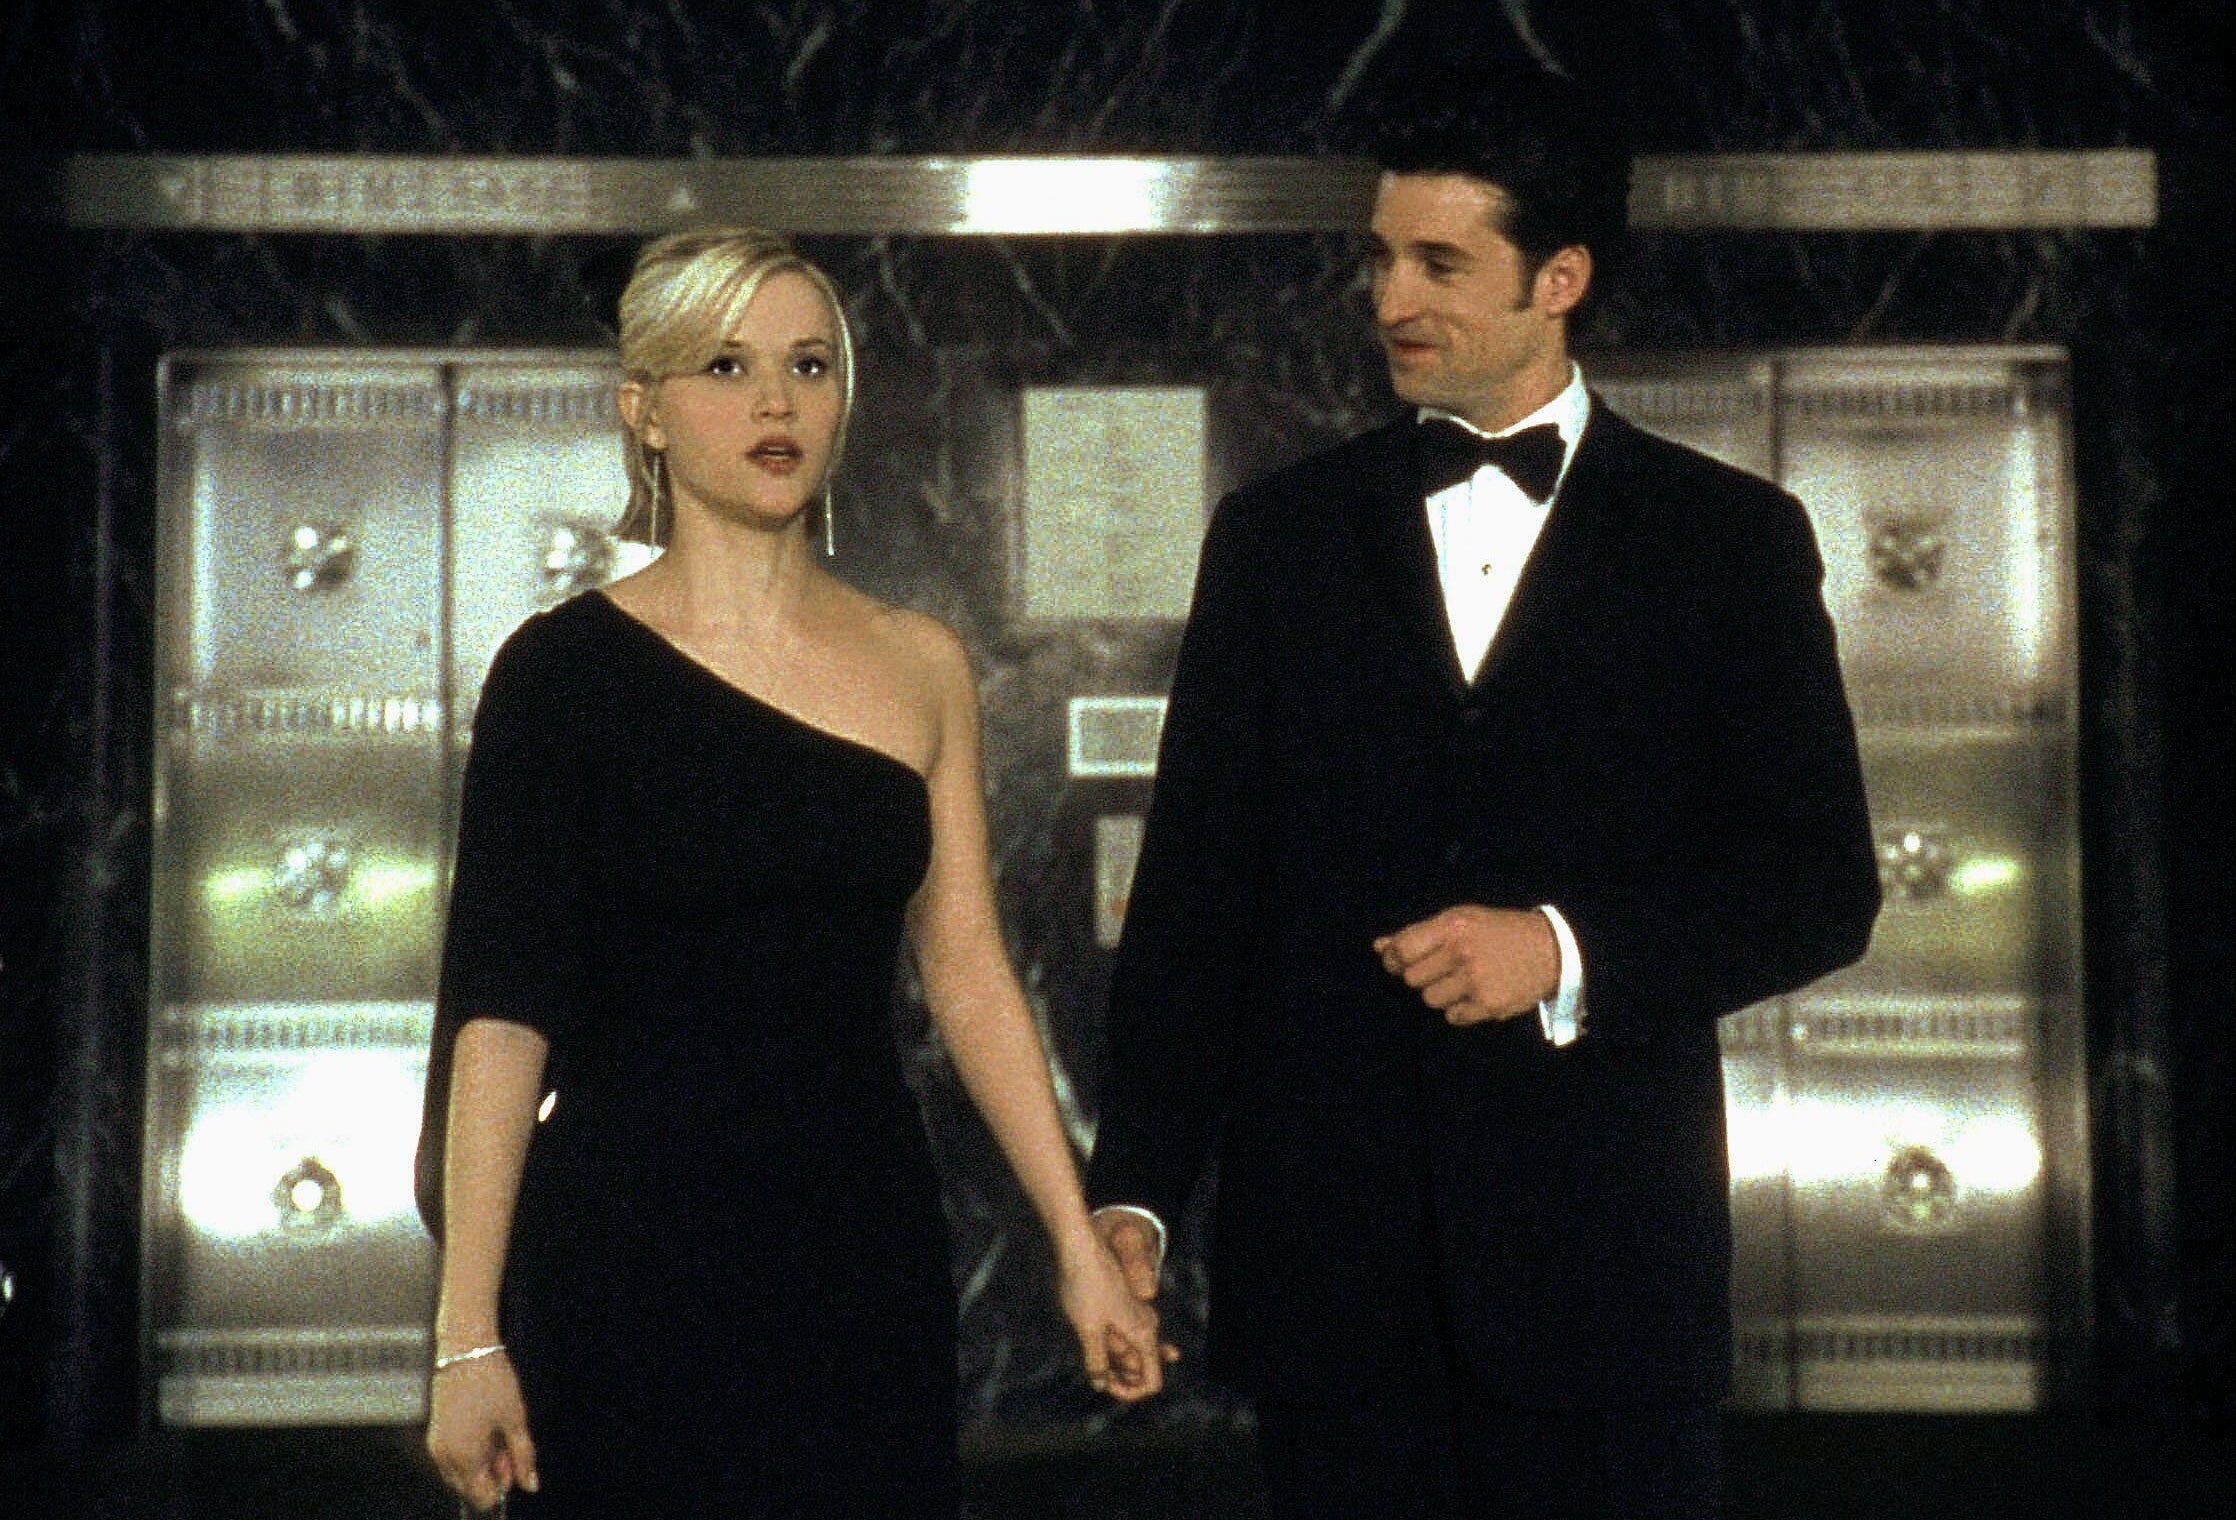 Reese Witherspoon and Patrick Dempsey in Sweet Home Alabama